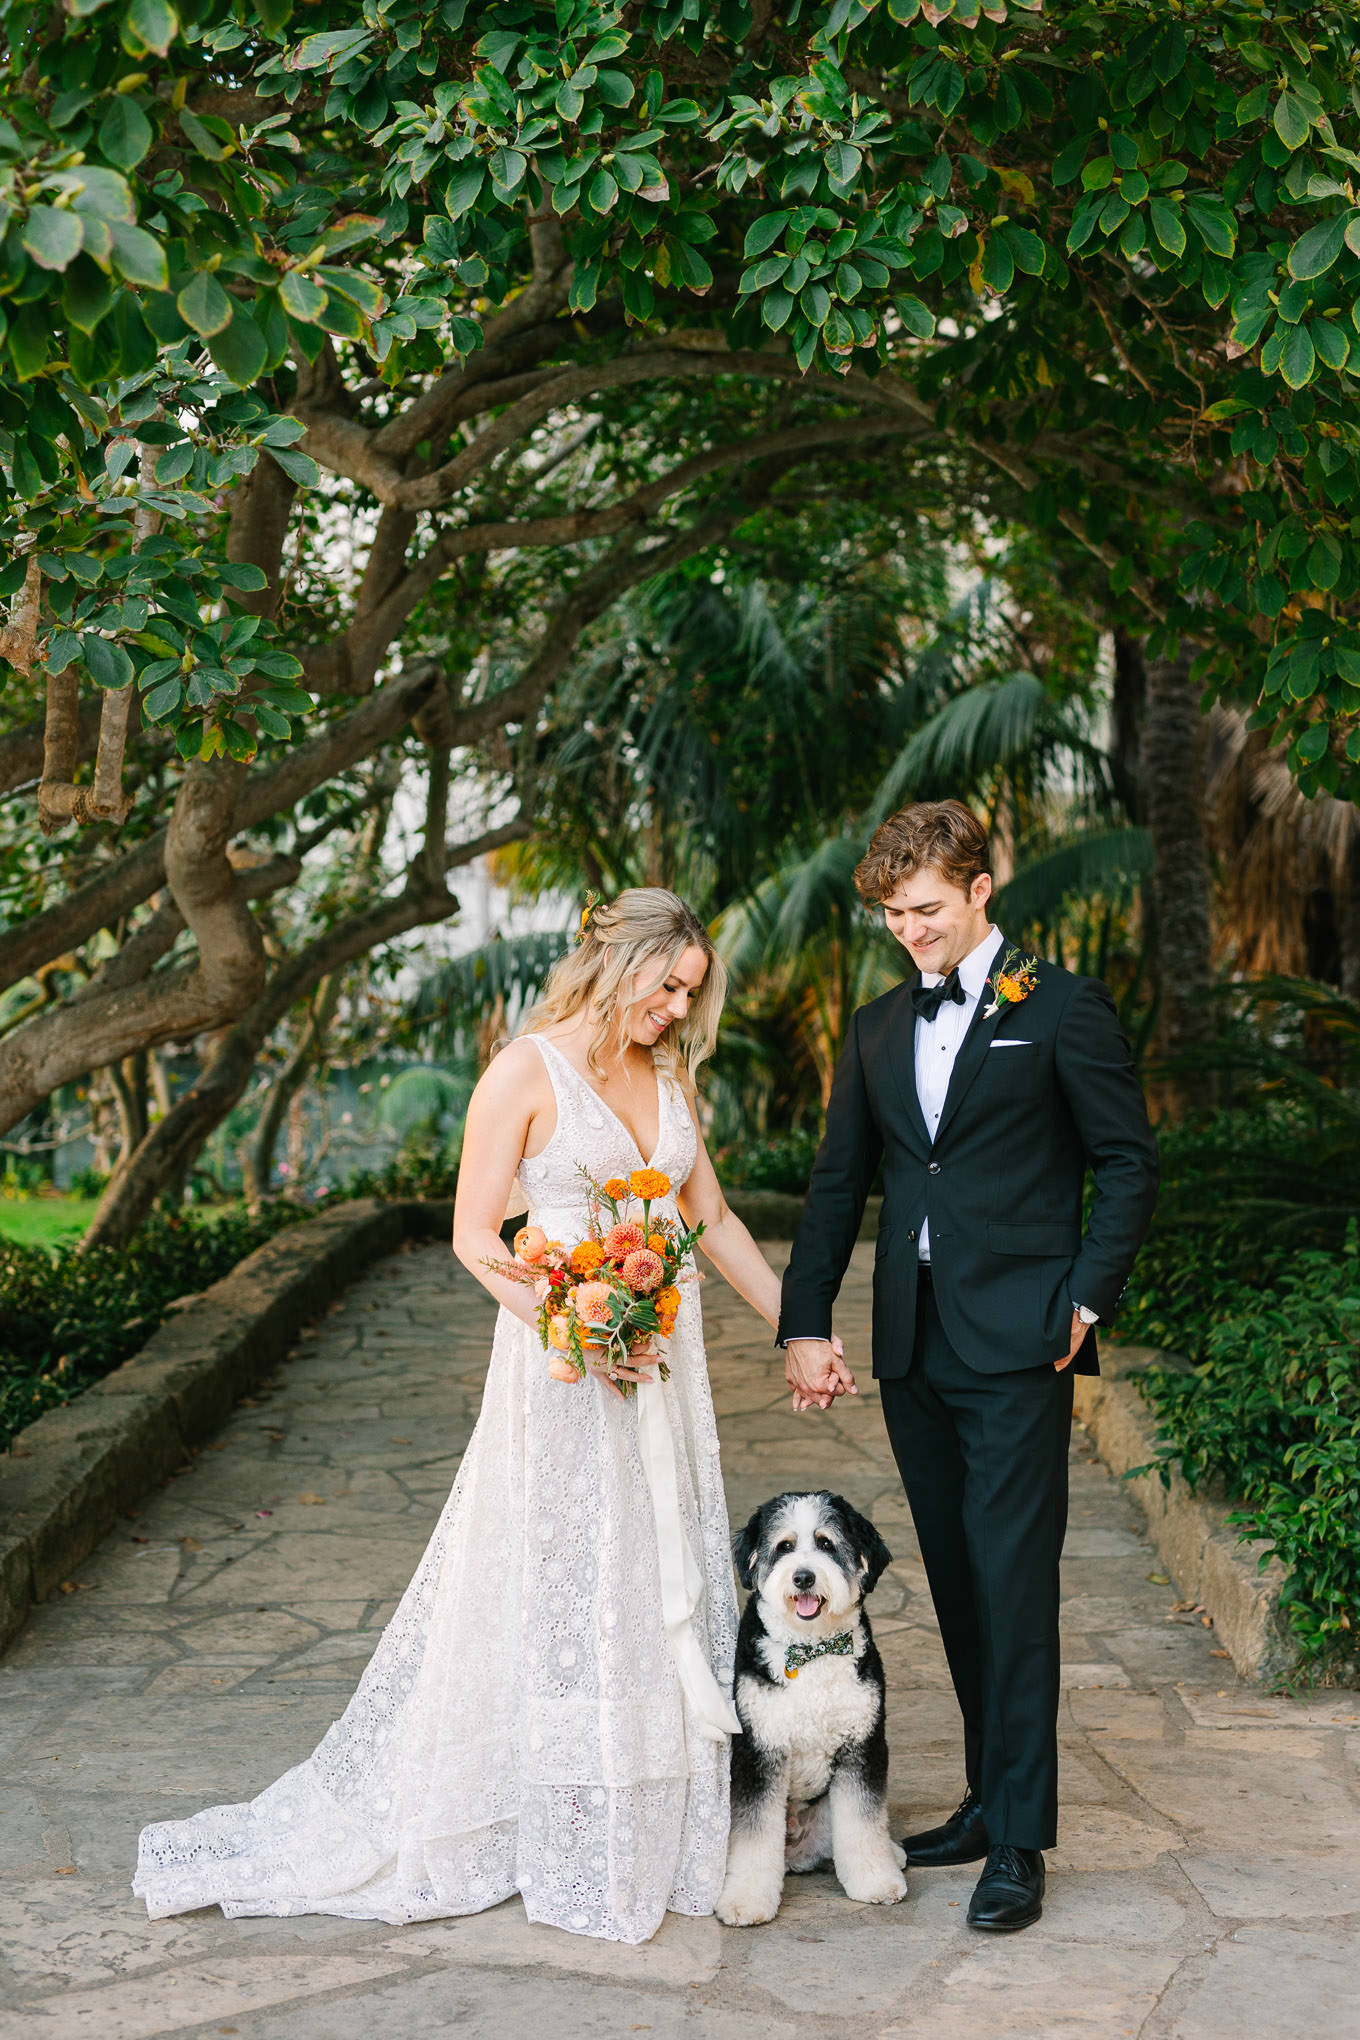 Santa Barbara Elopement | Wedding and elopement photography roundup | Los Angeles and Palm Springs photographer | #losangeleswedding #palmspringswedding #elopementphotographer Source: Mary Costa Photography | Los Angeles